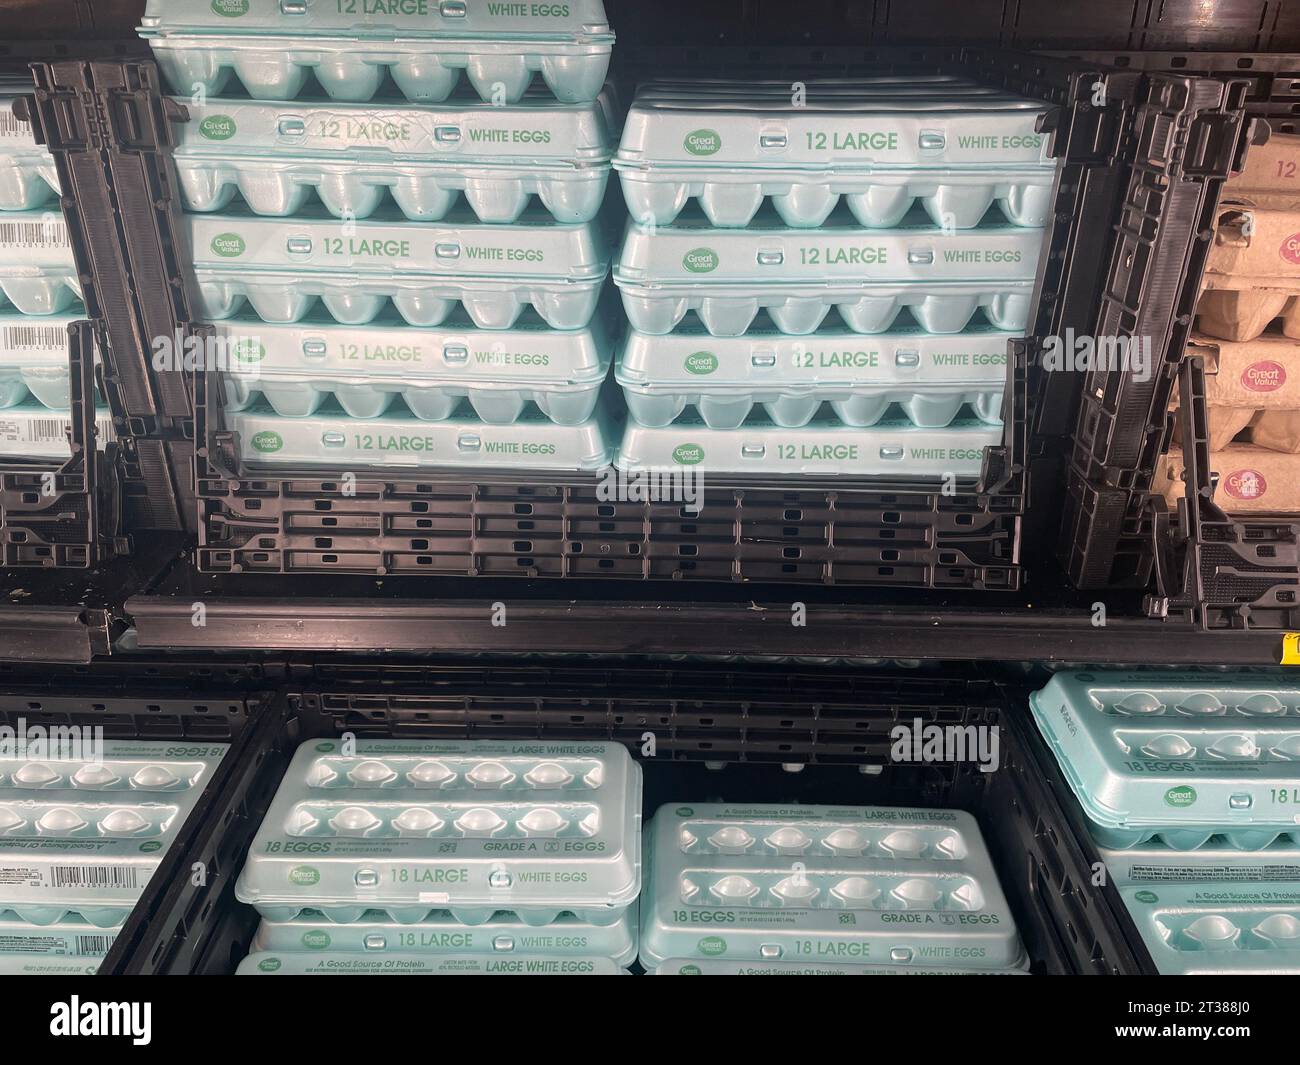 Grovetown, Ga USA - 08 06 23: Walmart grocery store Eggs section and prices crates of eggs Stock Photo